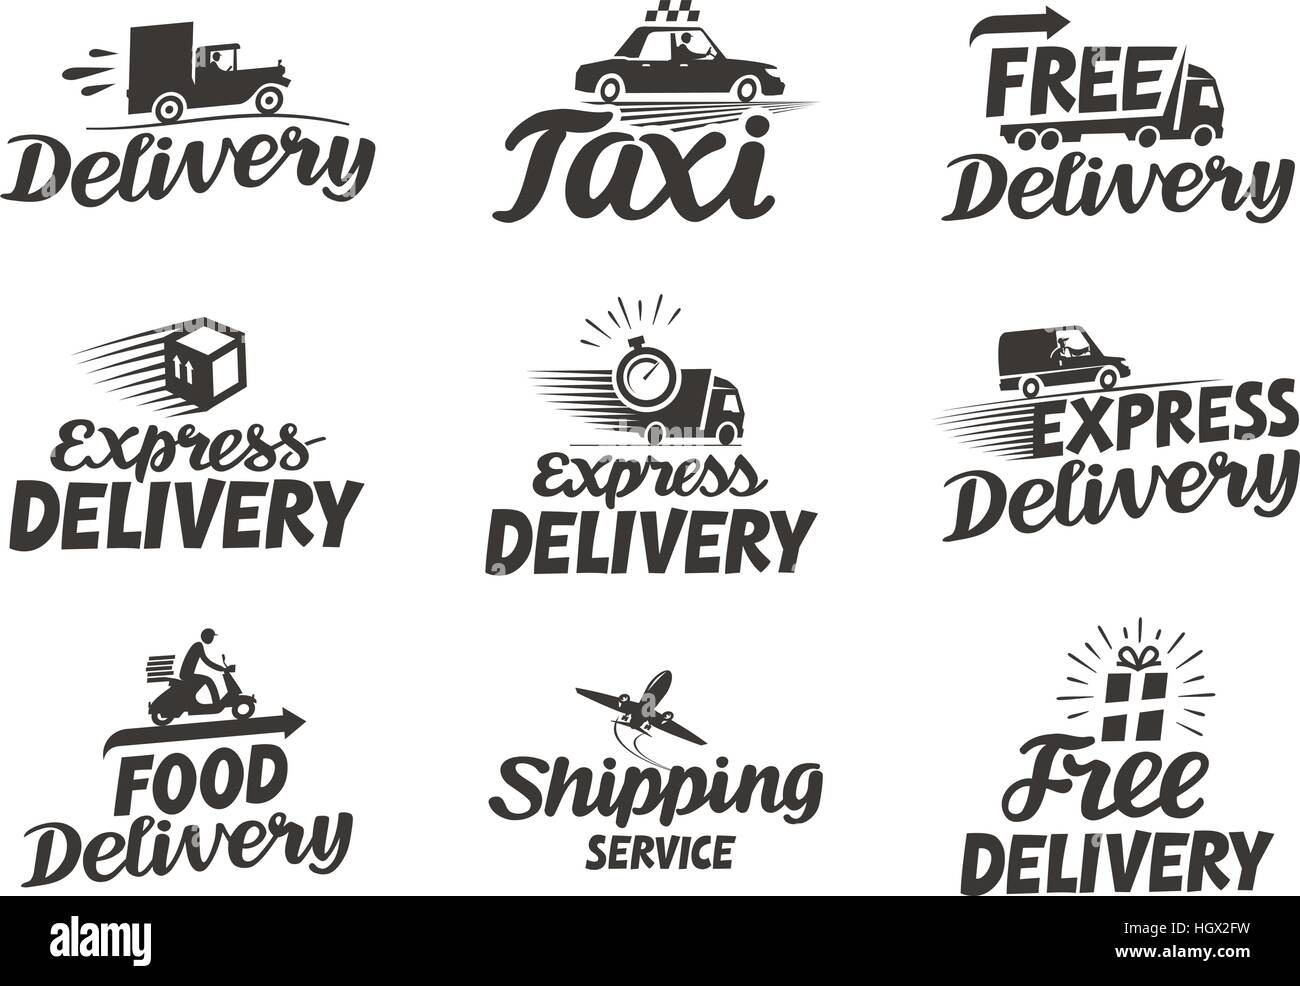 Fast Delivery Images – Browse 9,816 Stock Photos, Vectors, and